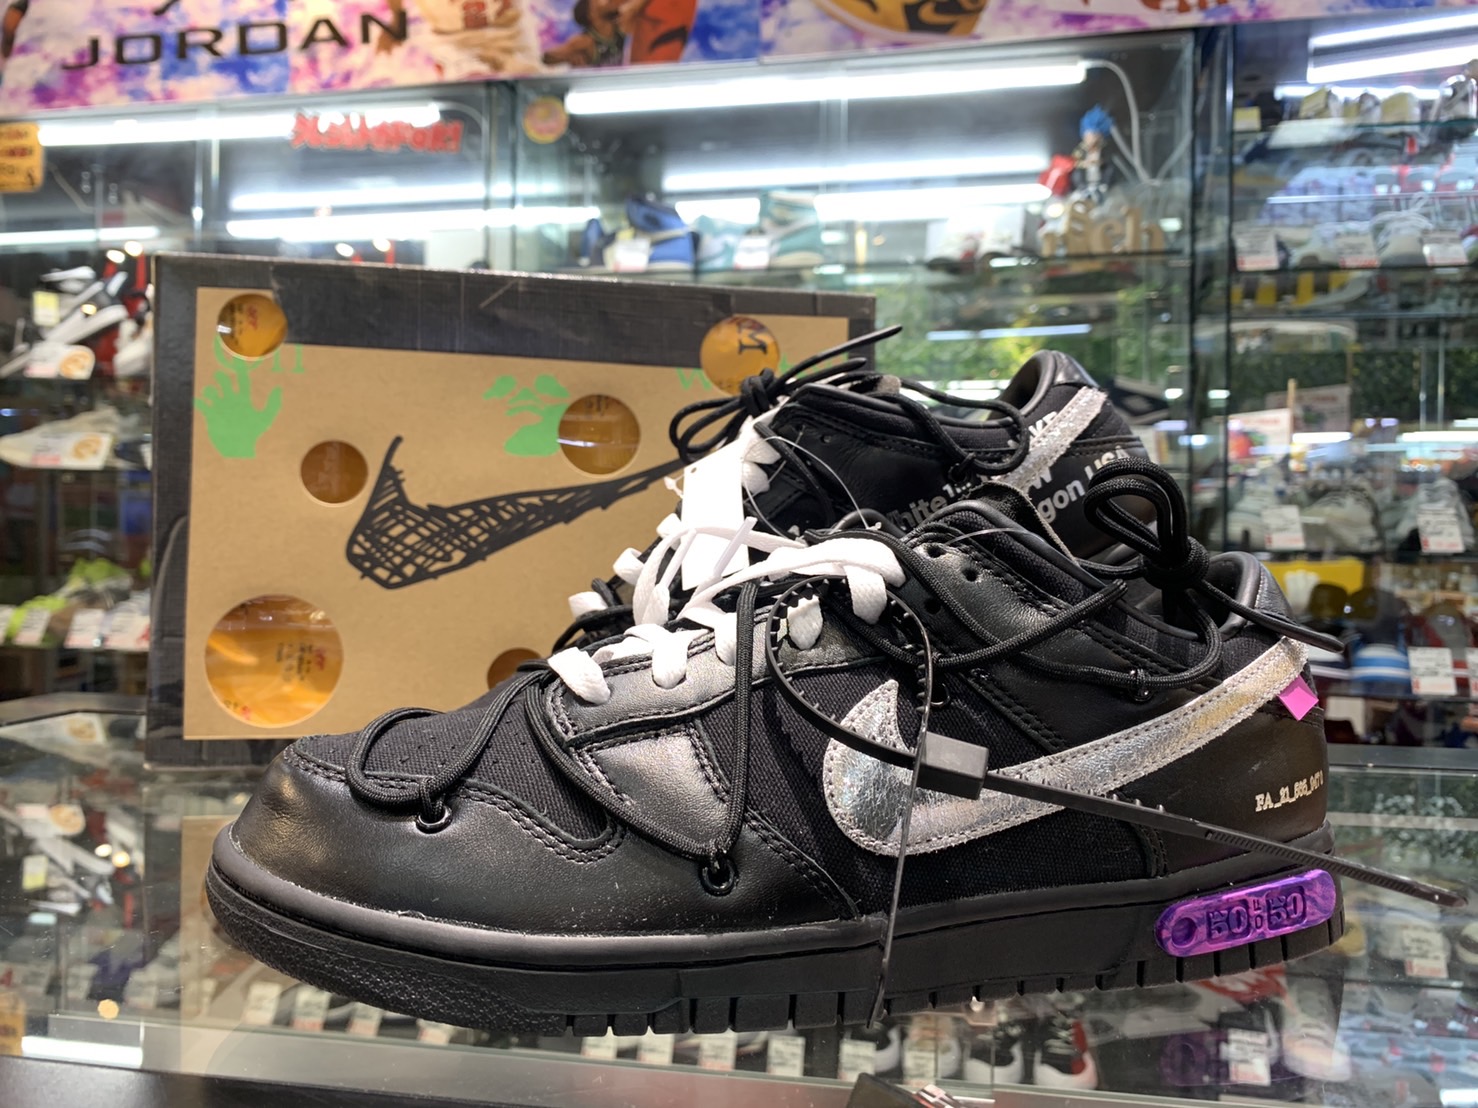 off-white nike dunk low 1 of 50 black